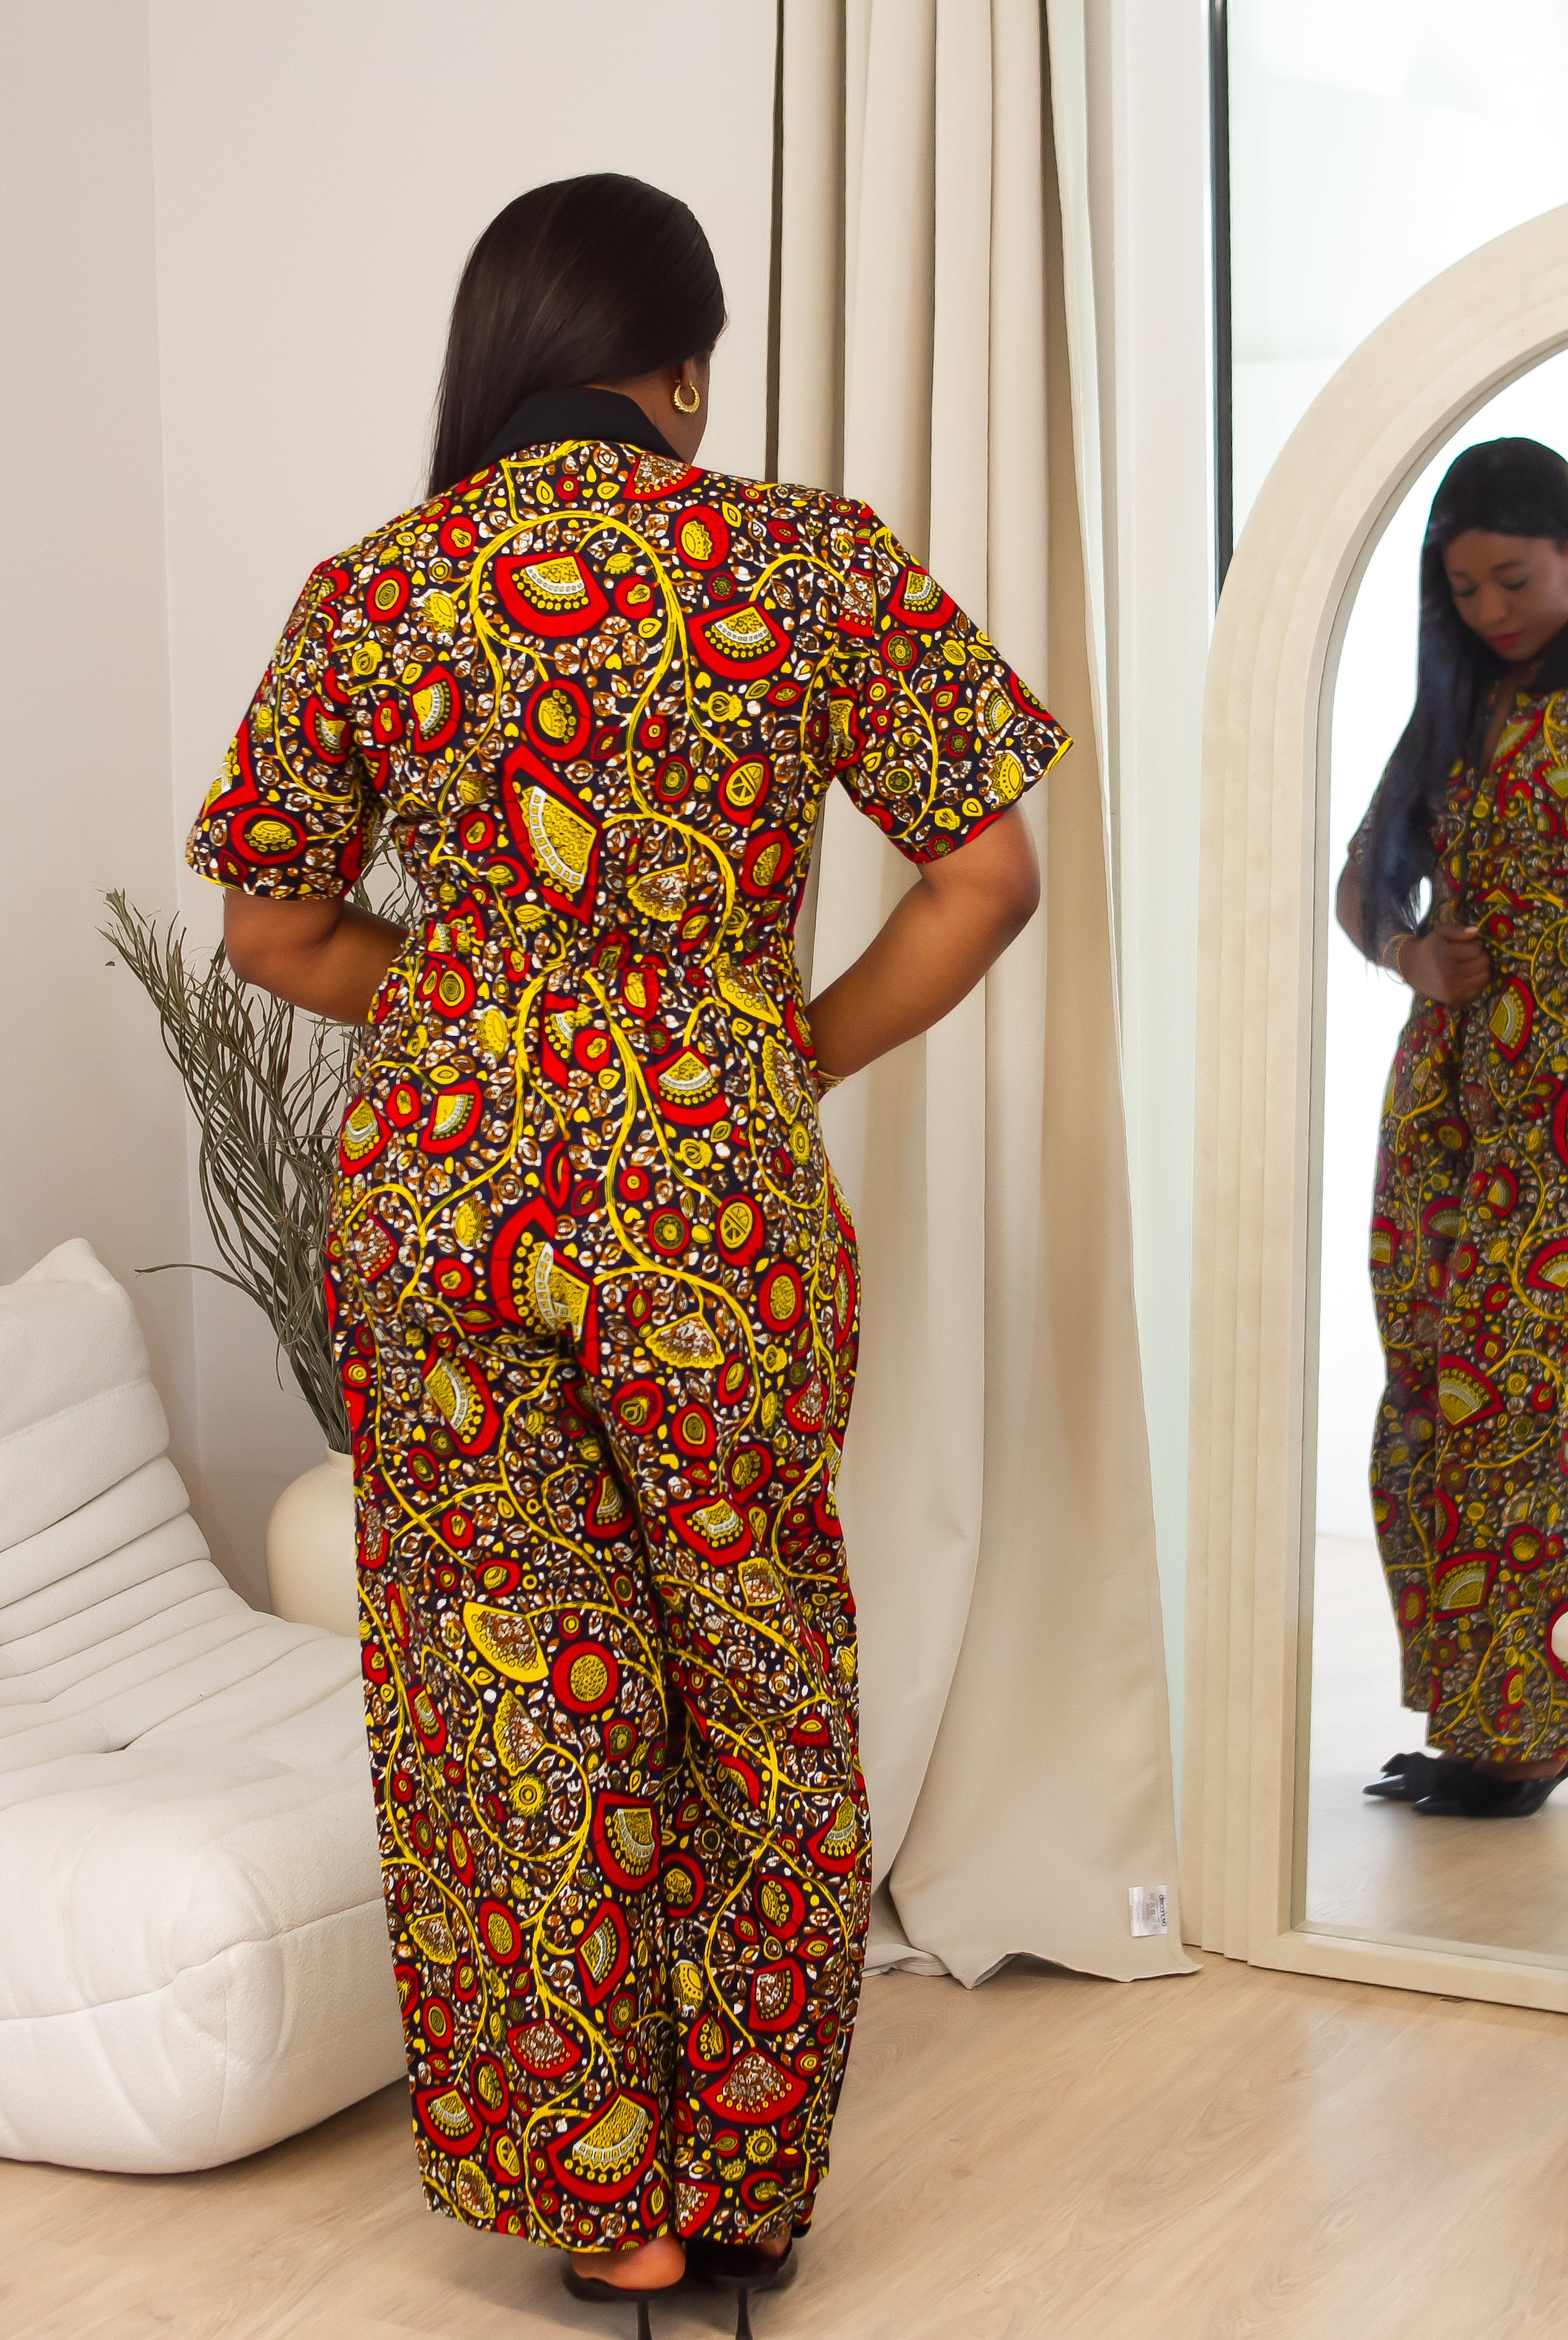 African print wide leg trousers | African print trousers UK | African print pants | African Print wide leg pants | African print clothing UK | Ready to wear African print pants | African Trouser styles | African clothing | African outfit | Ankara print Trousers | Ankara pants for Women | Ankara Styles Trousers for ladies | African pallazo Trousers | Danshiki Trousers | High waist African print wide leg pants | African high waist pants| African loose fit Trousers | African print Trousers